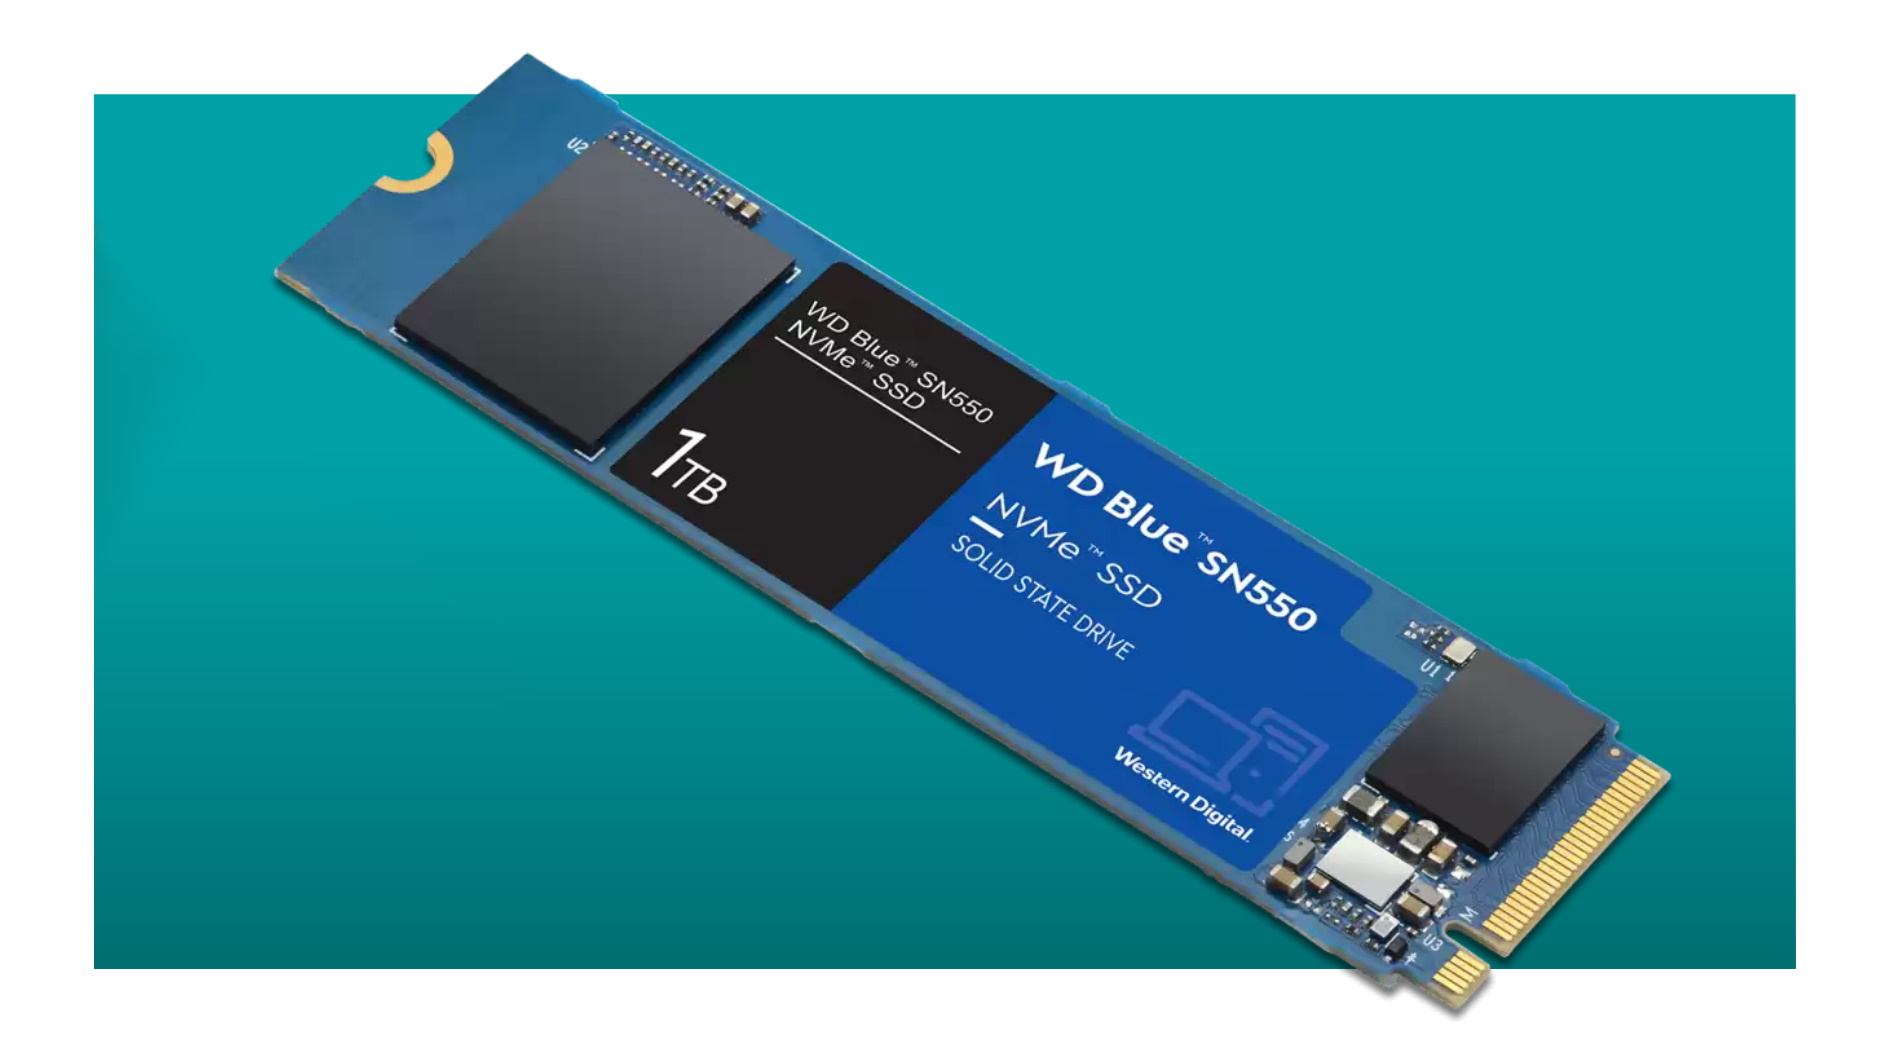 This is the cheapest 1TB NVMe SSD you can buy right now